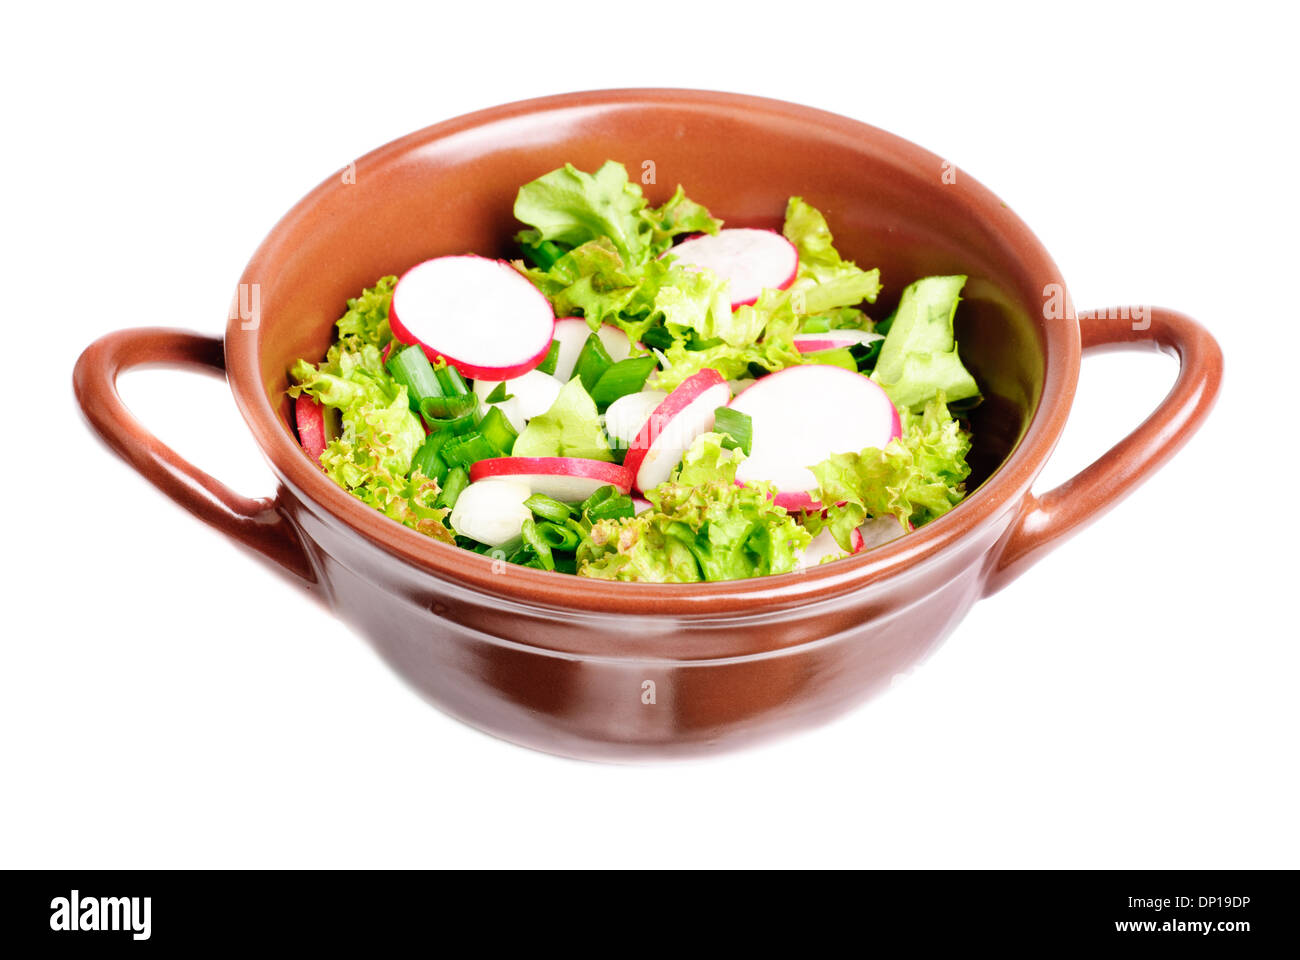 fresh salad with radishes, lettuce and onions on bowl isolated on white Stock Photo